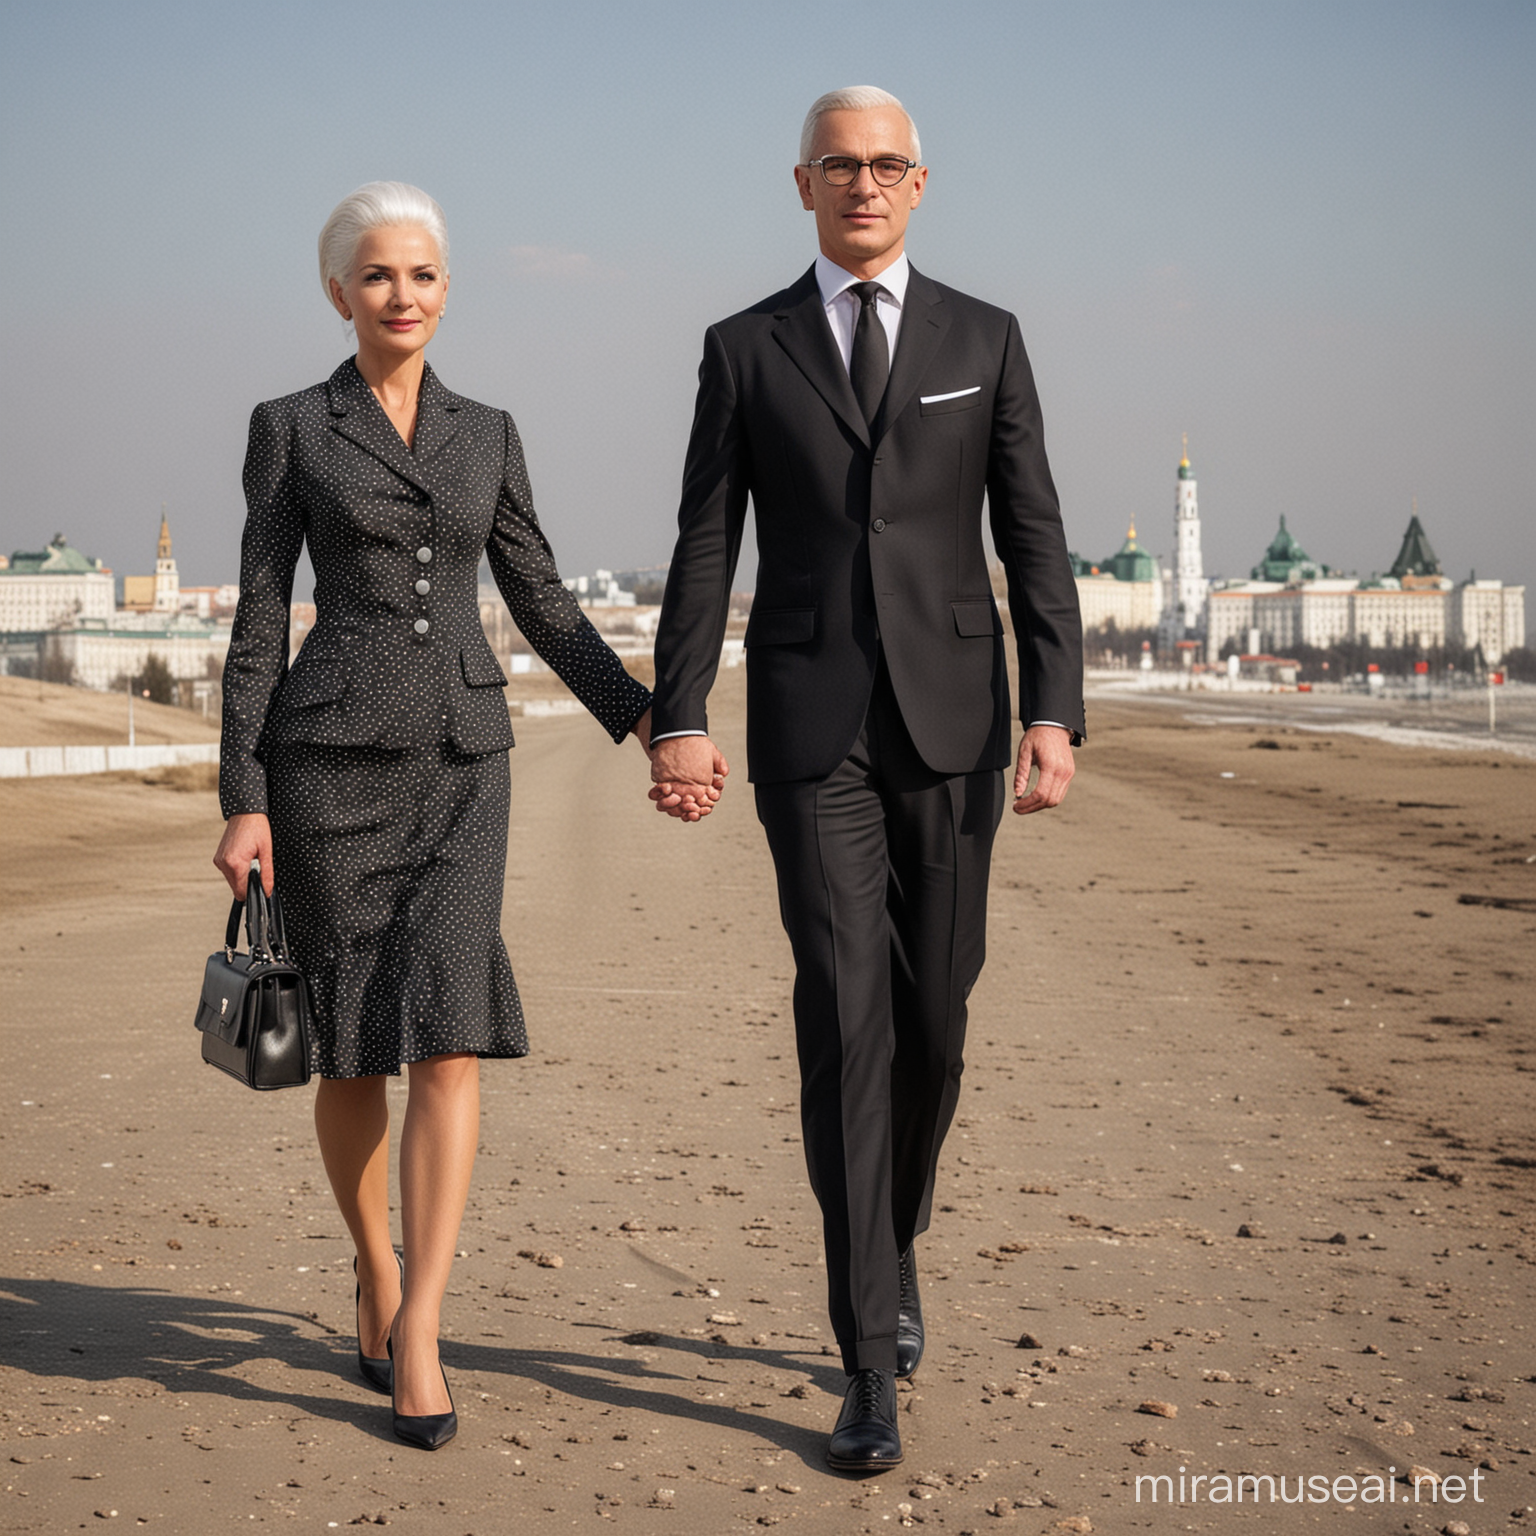 Elegant Mature Woman and Young Bald Man Exploring Russia Together